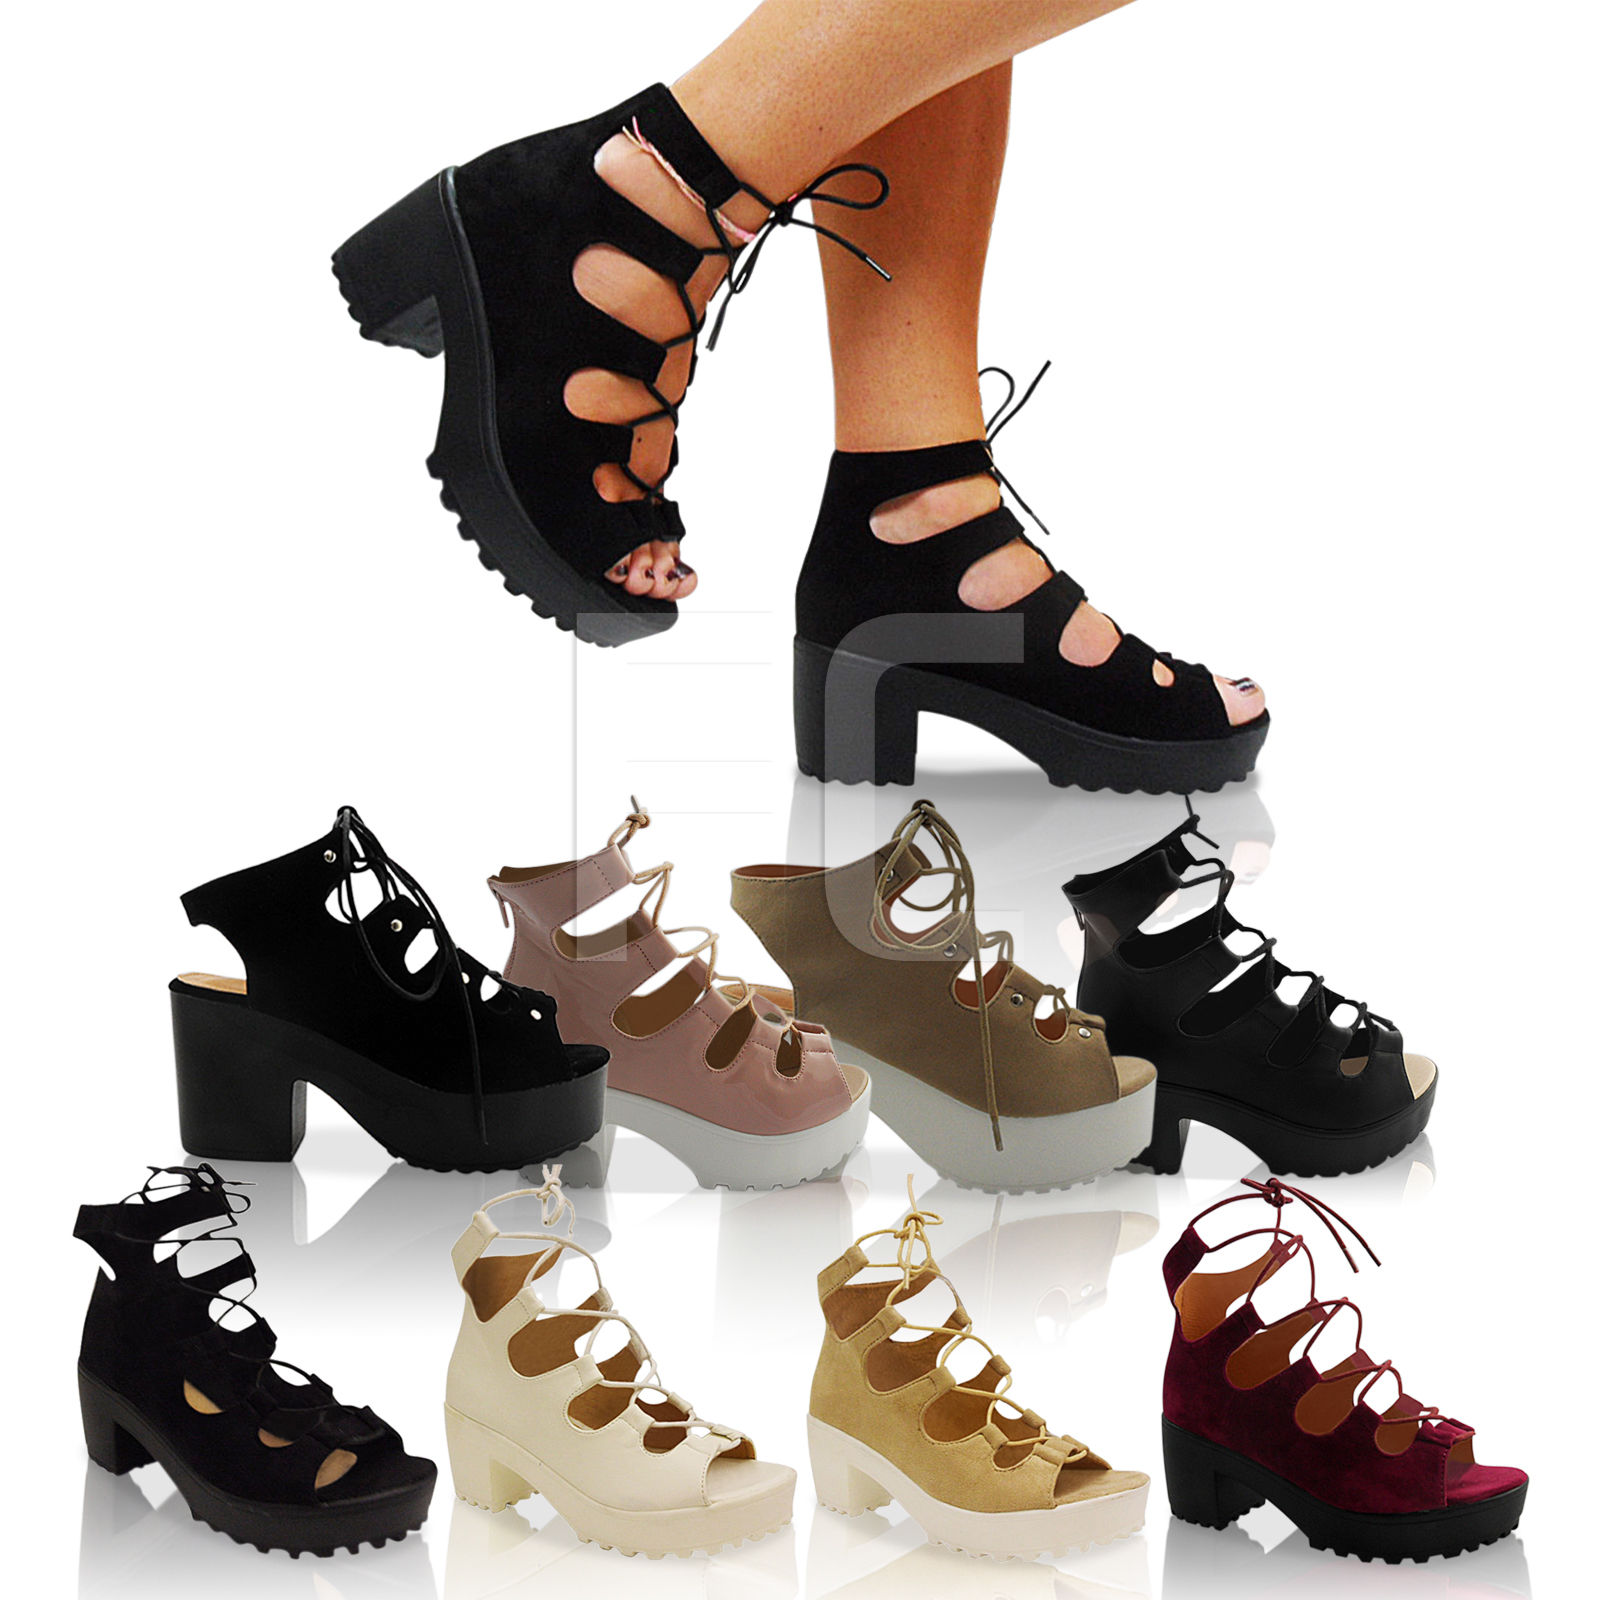 NEW WOMENS LADIES MID LOW BLOCK HEEL CHUNKY LACE UP CUT OUT GLADIATOR SHOES SIZE